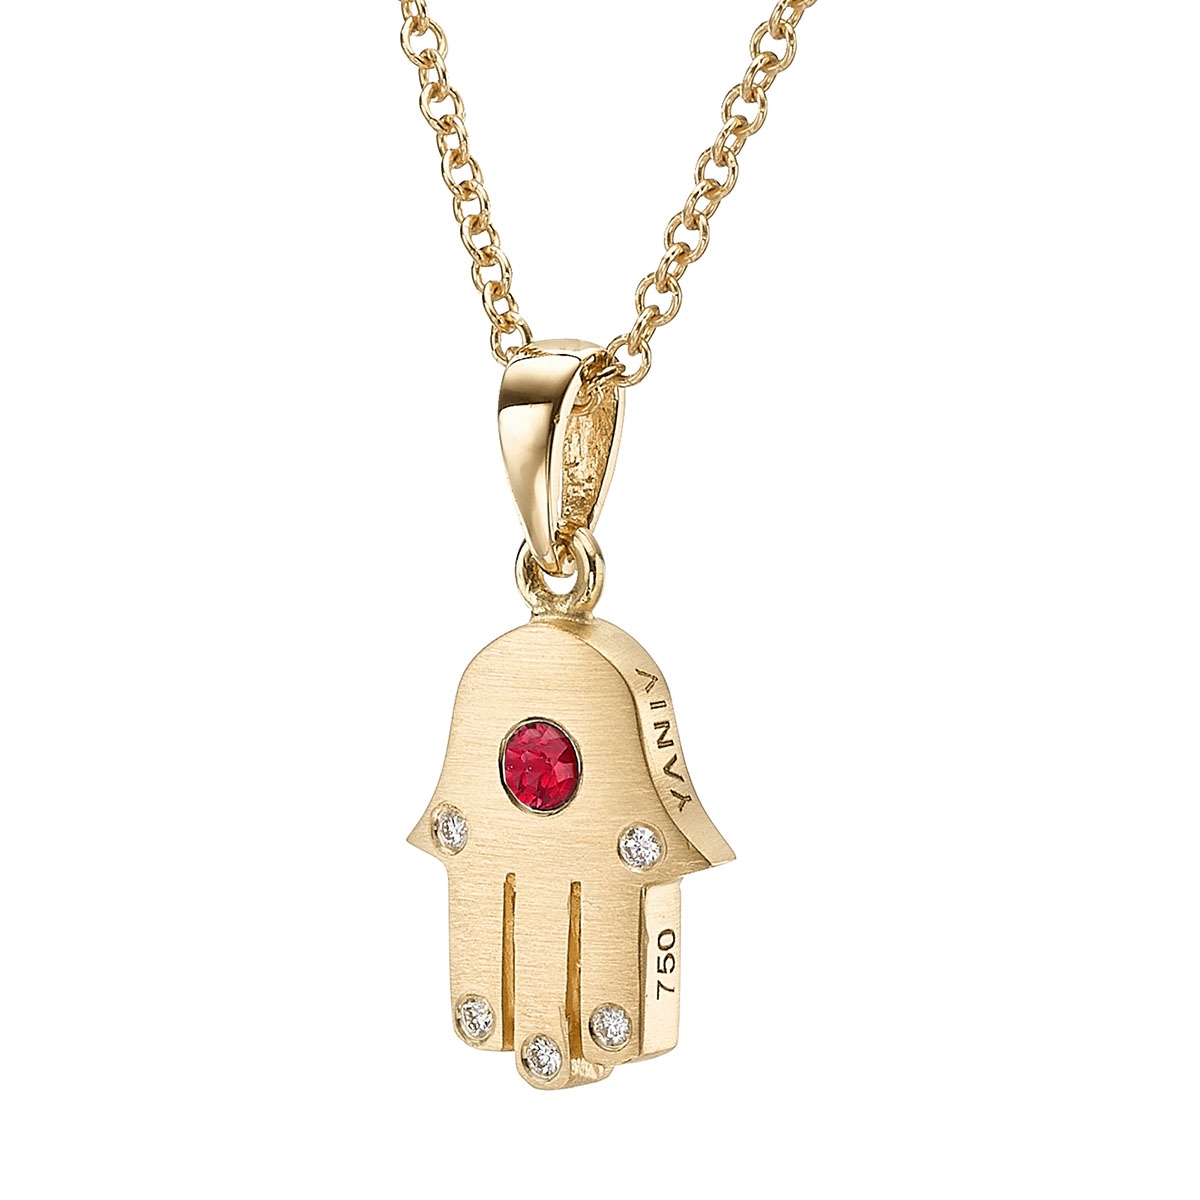 Thick 18K Gold Hamsa Pendant With Red Ruby Stone and 5 White Diamonds (Choice of Color) - 1